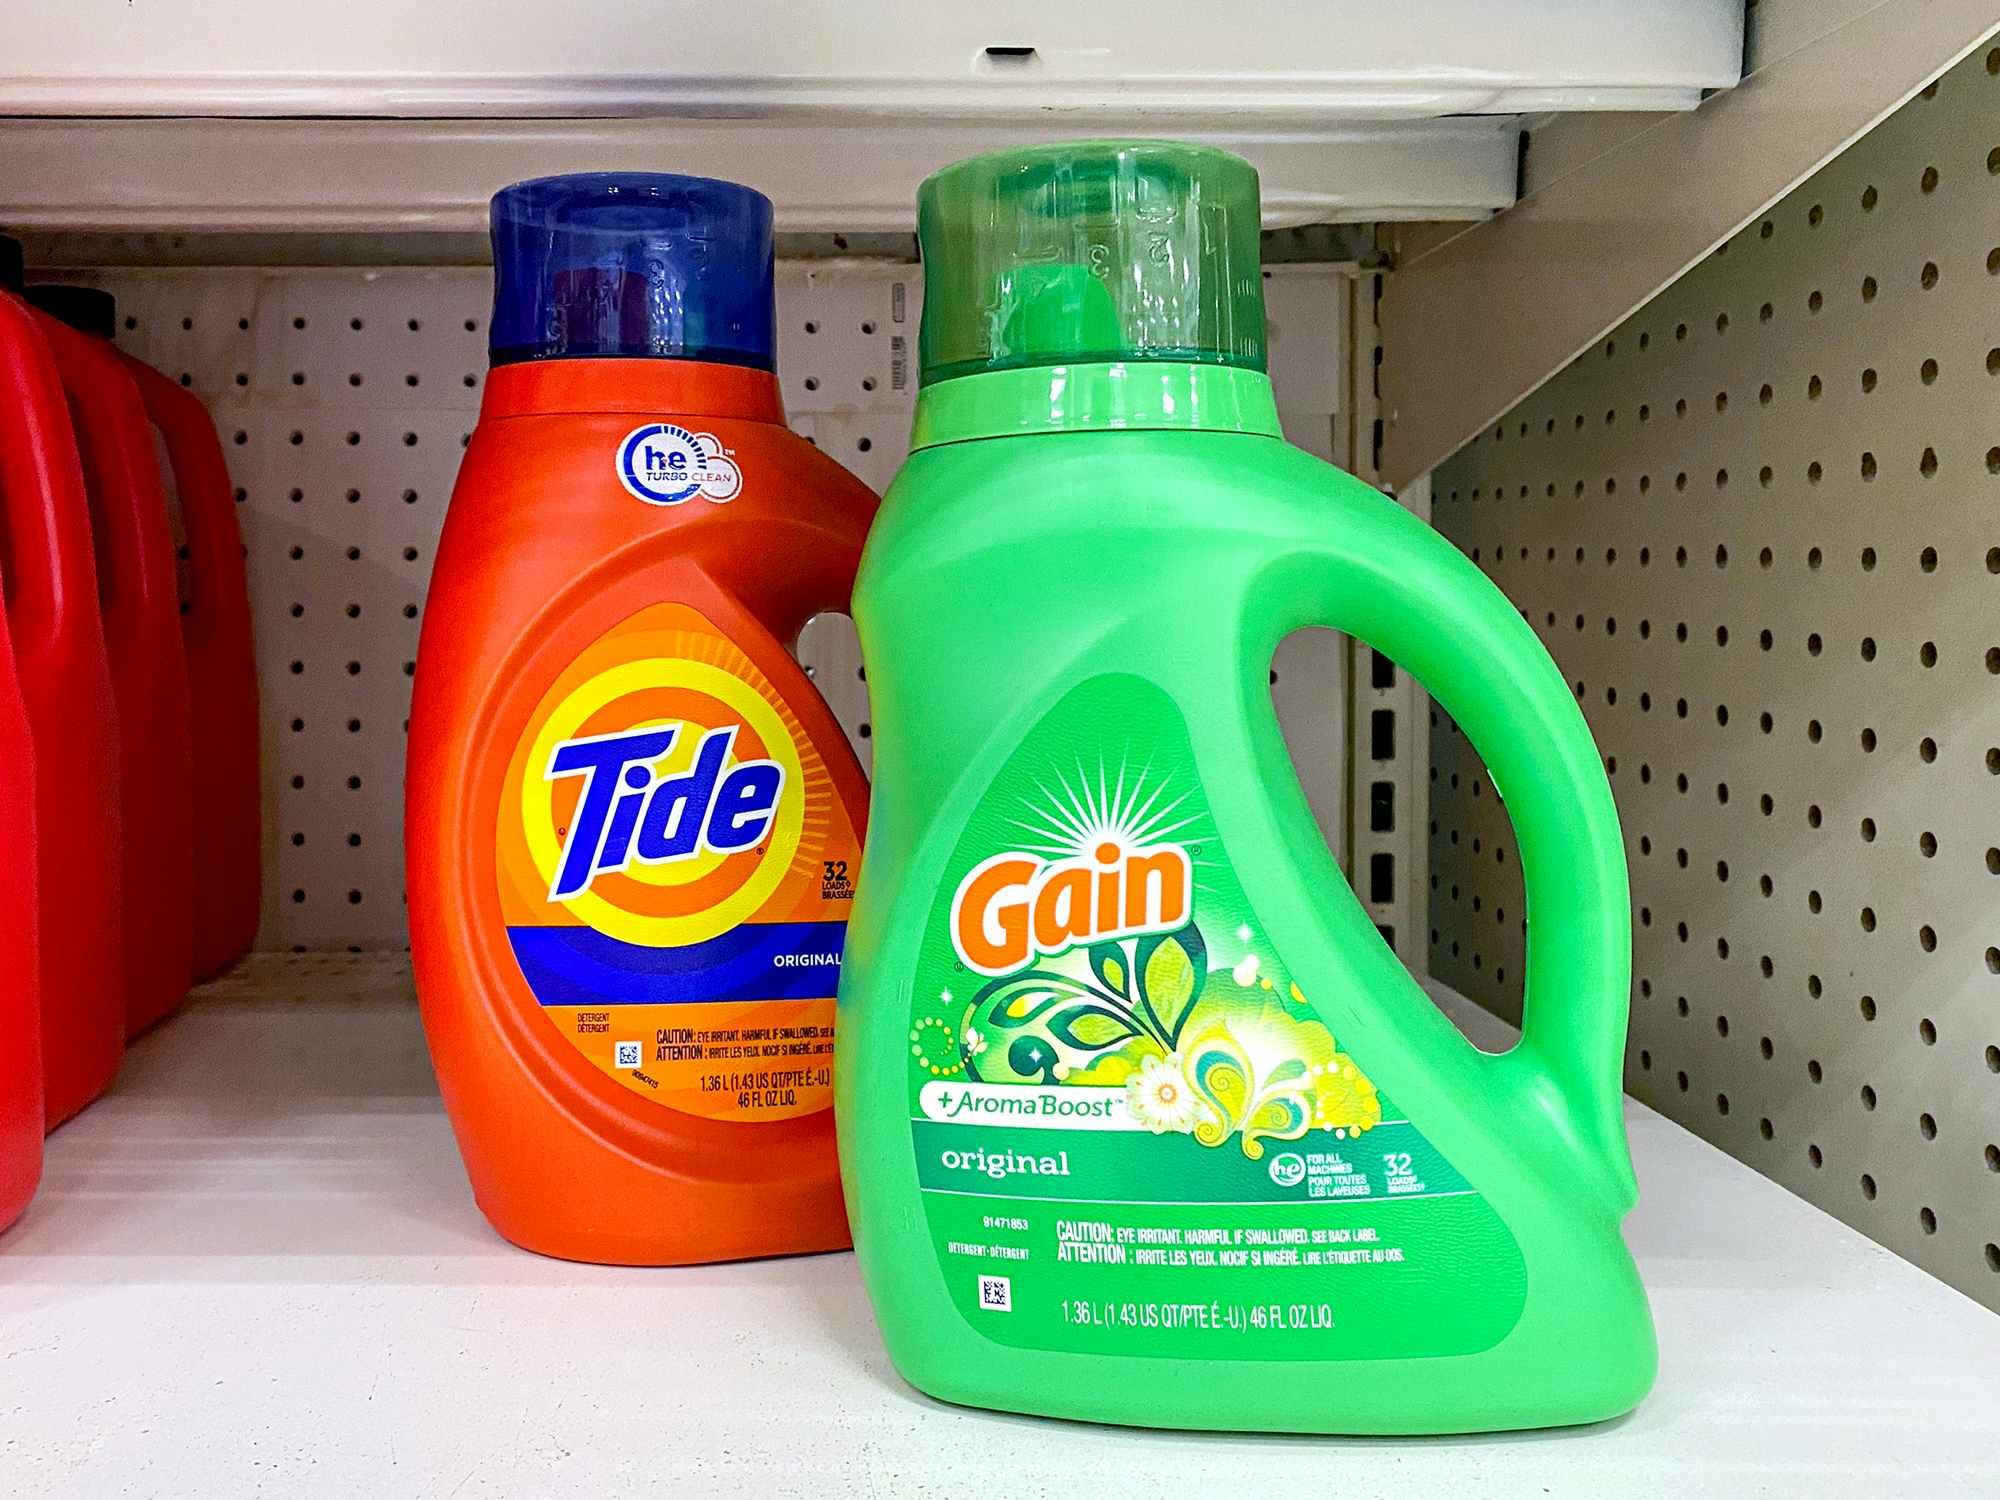 bottles of tide and gain original laundry detergents on store shelf